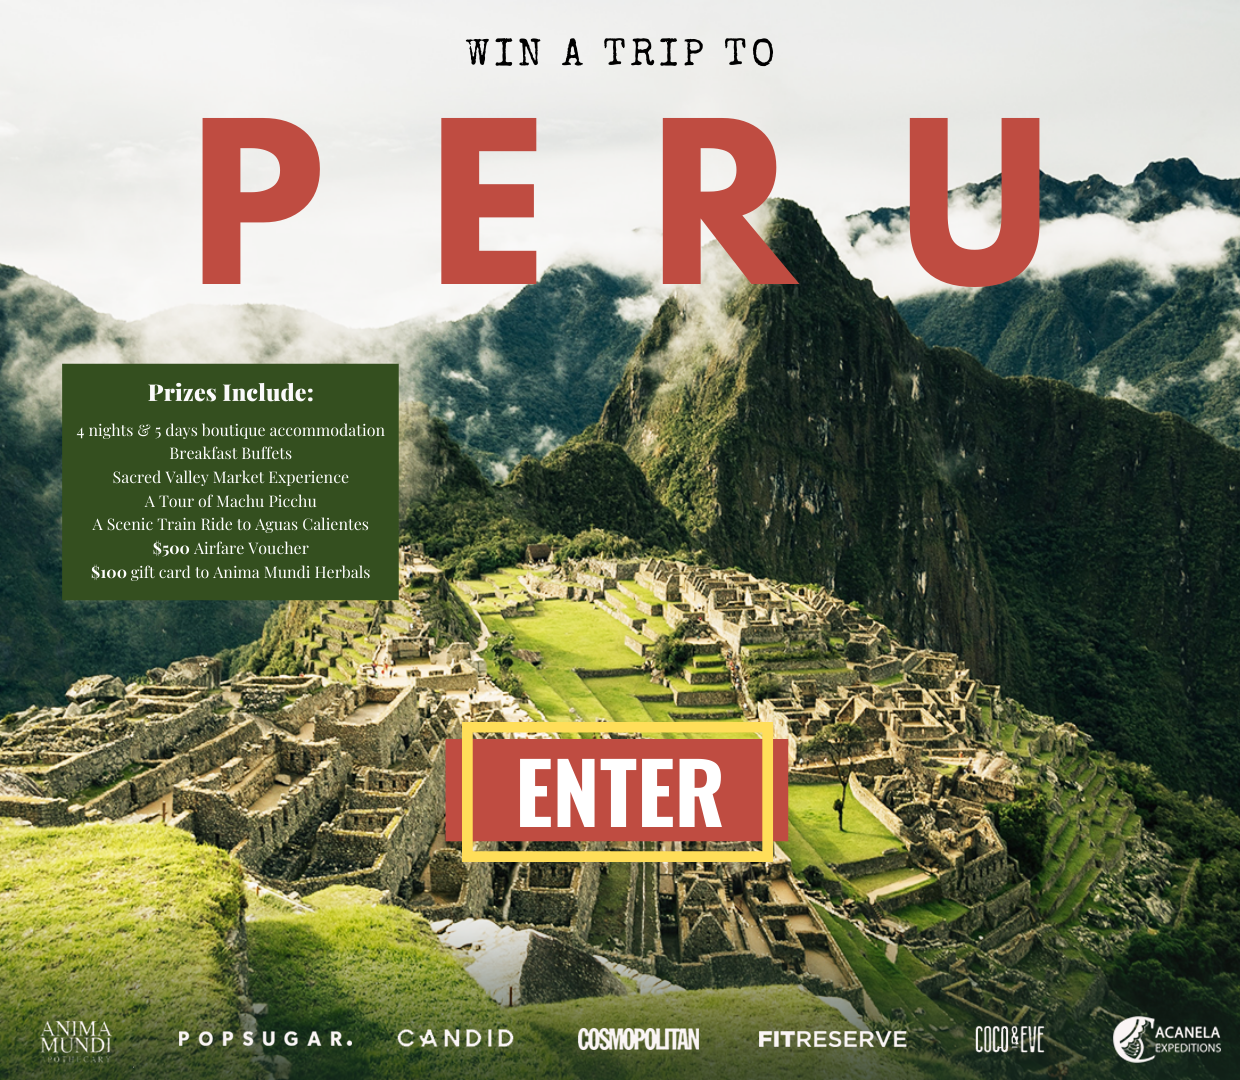 You could win the following for an amazing trip in Peru: 4-night, 5-day boutique accommodation, breakfast buffets, Sacred Valley Market Experience, a tour of Machu Picchu, a scenic train ride to Aguas Calientes, a $500 airfare voucher, and a $100 gift card to Anima Mundi Herbals.